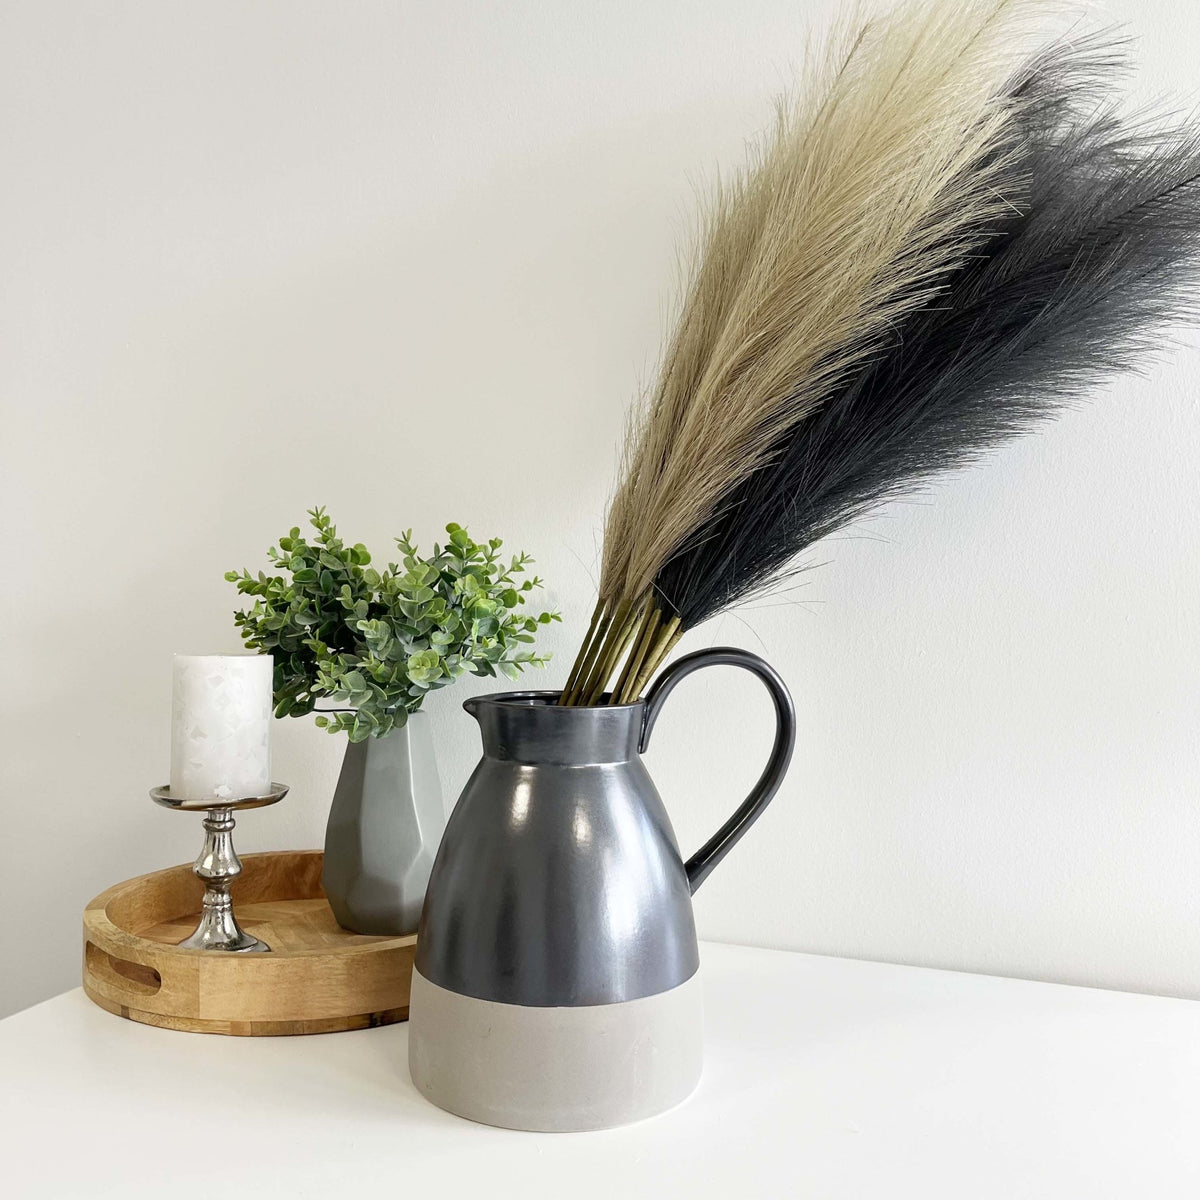 Bleached Faux Pampas Grass Stems in grey vase with wooden tray and green plant and candle.